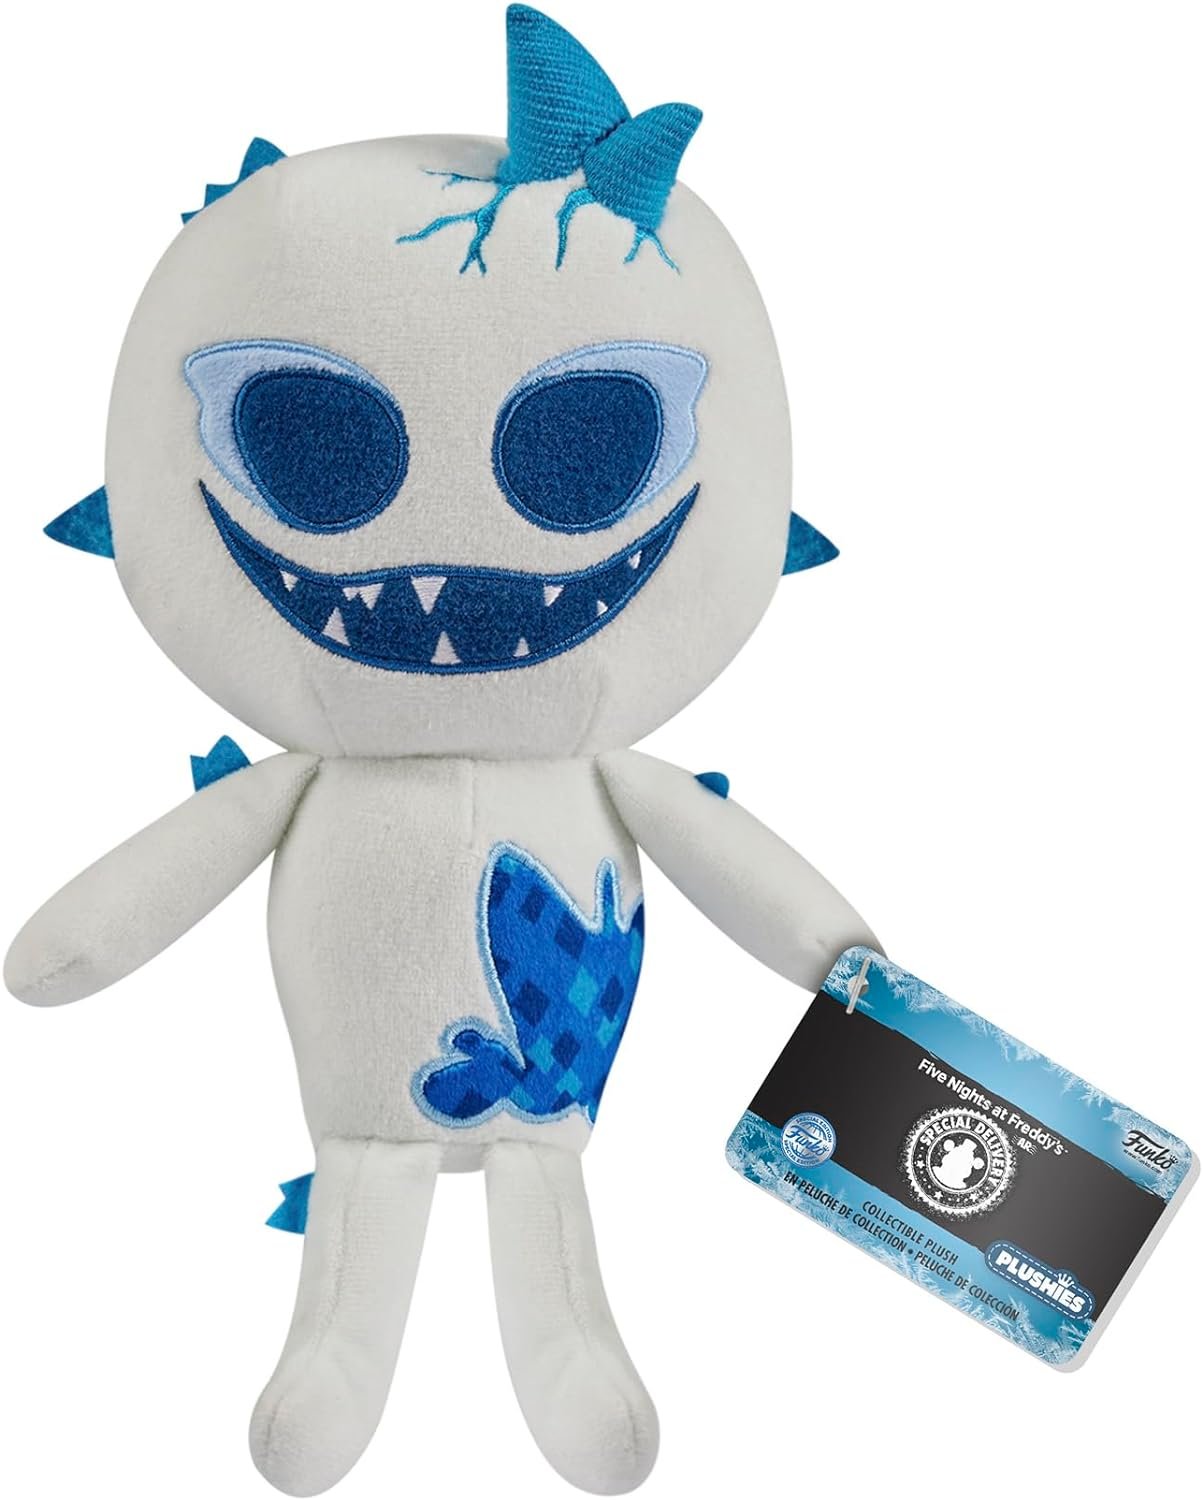 Funko Five Nights at Freddys Frostbite Balloon Boy Plush Figure Limited Edition Exclusive